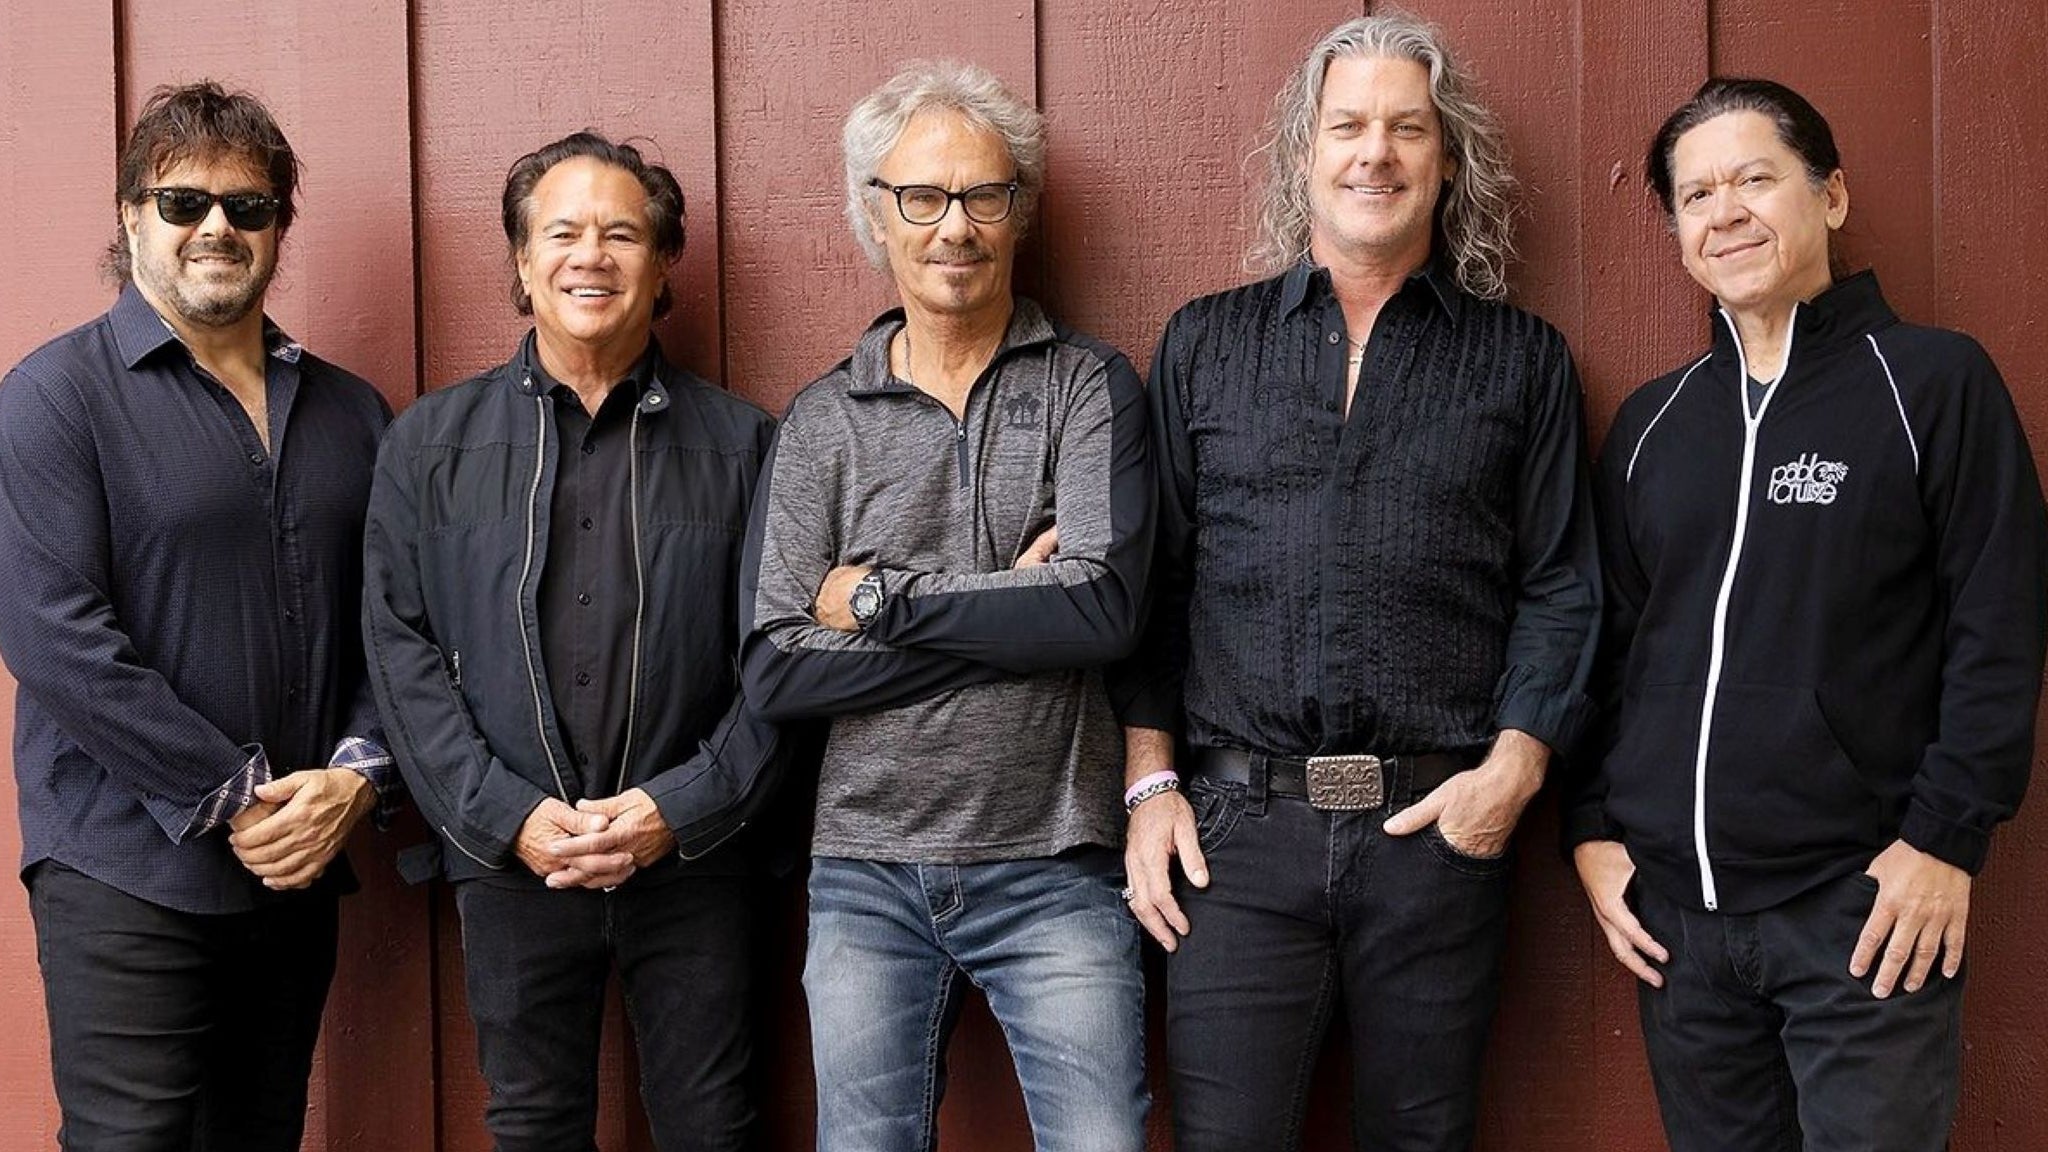 Pablo Cruise presale c0de for show tickets in Portsmouth, NH (Jimmy’s Jazz and Blues Club)